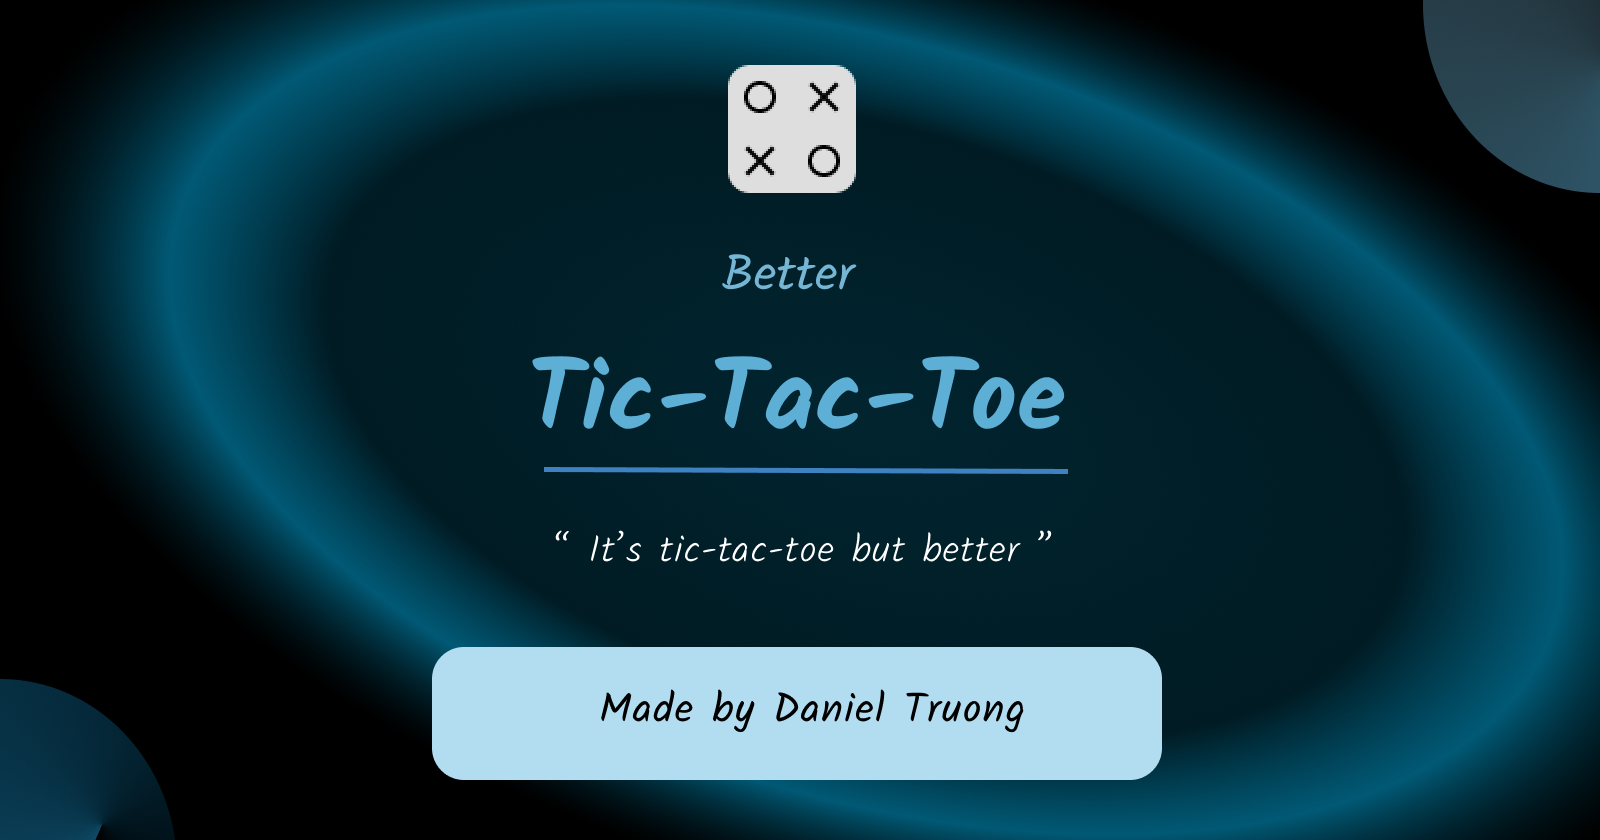 GitHub - anhduy1202/better-tic-tac-toe-client: A multiplayer